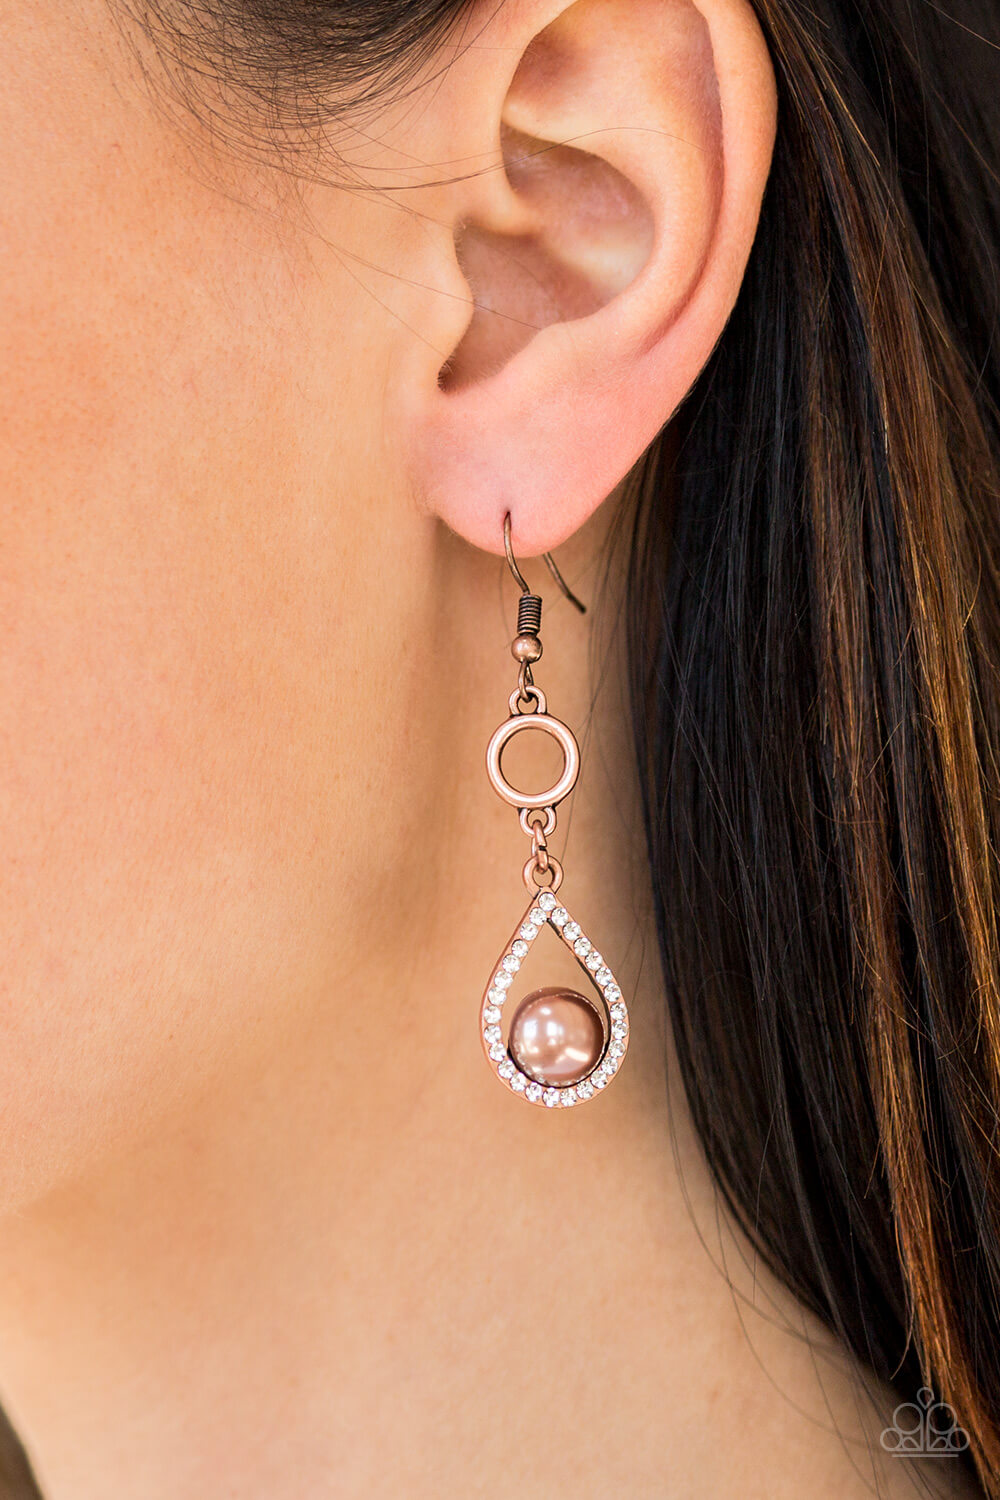 Roll Out The Ritz - Copper Earrings - Princess Glam Shop